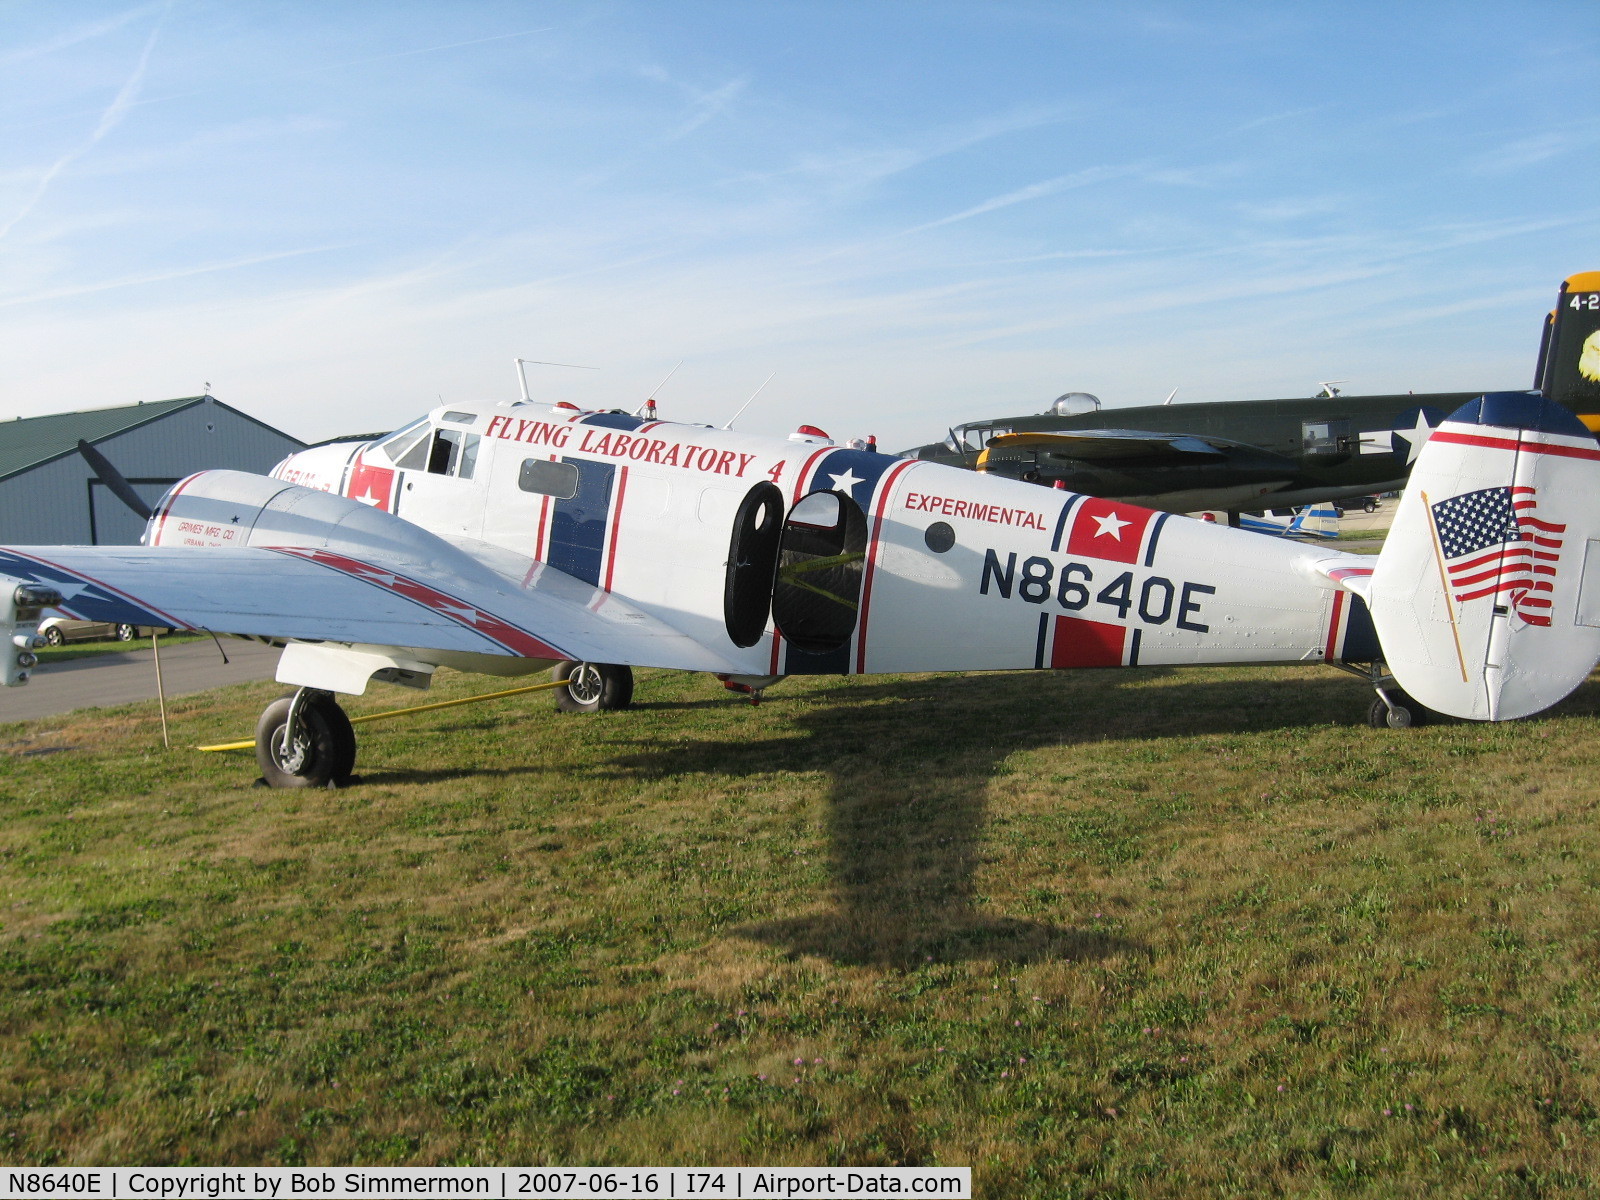 N8640E, Beech C-45H Expeditor C/N AF-510, Grimes flying lab at Urbana, OH.  Instigator of numerous reported UFO sightings over several decades.